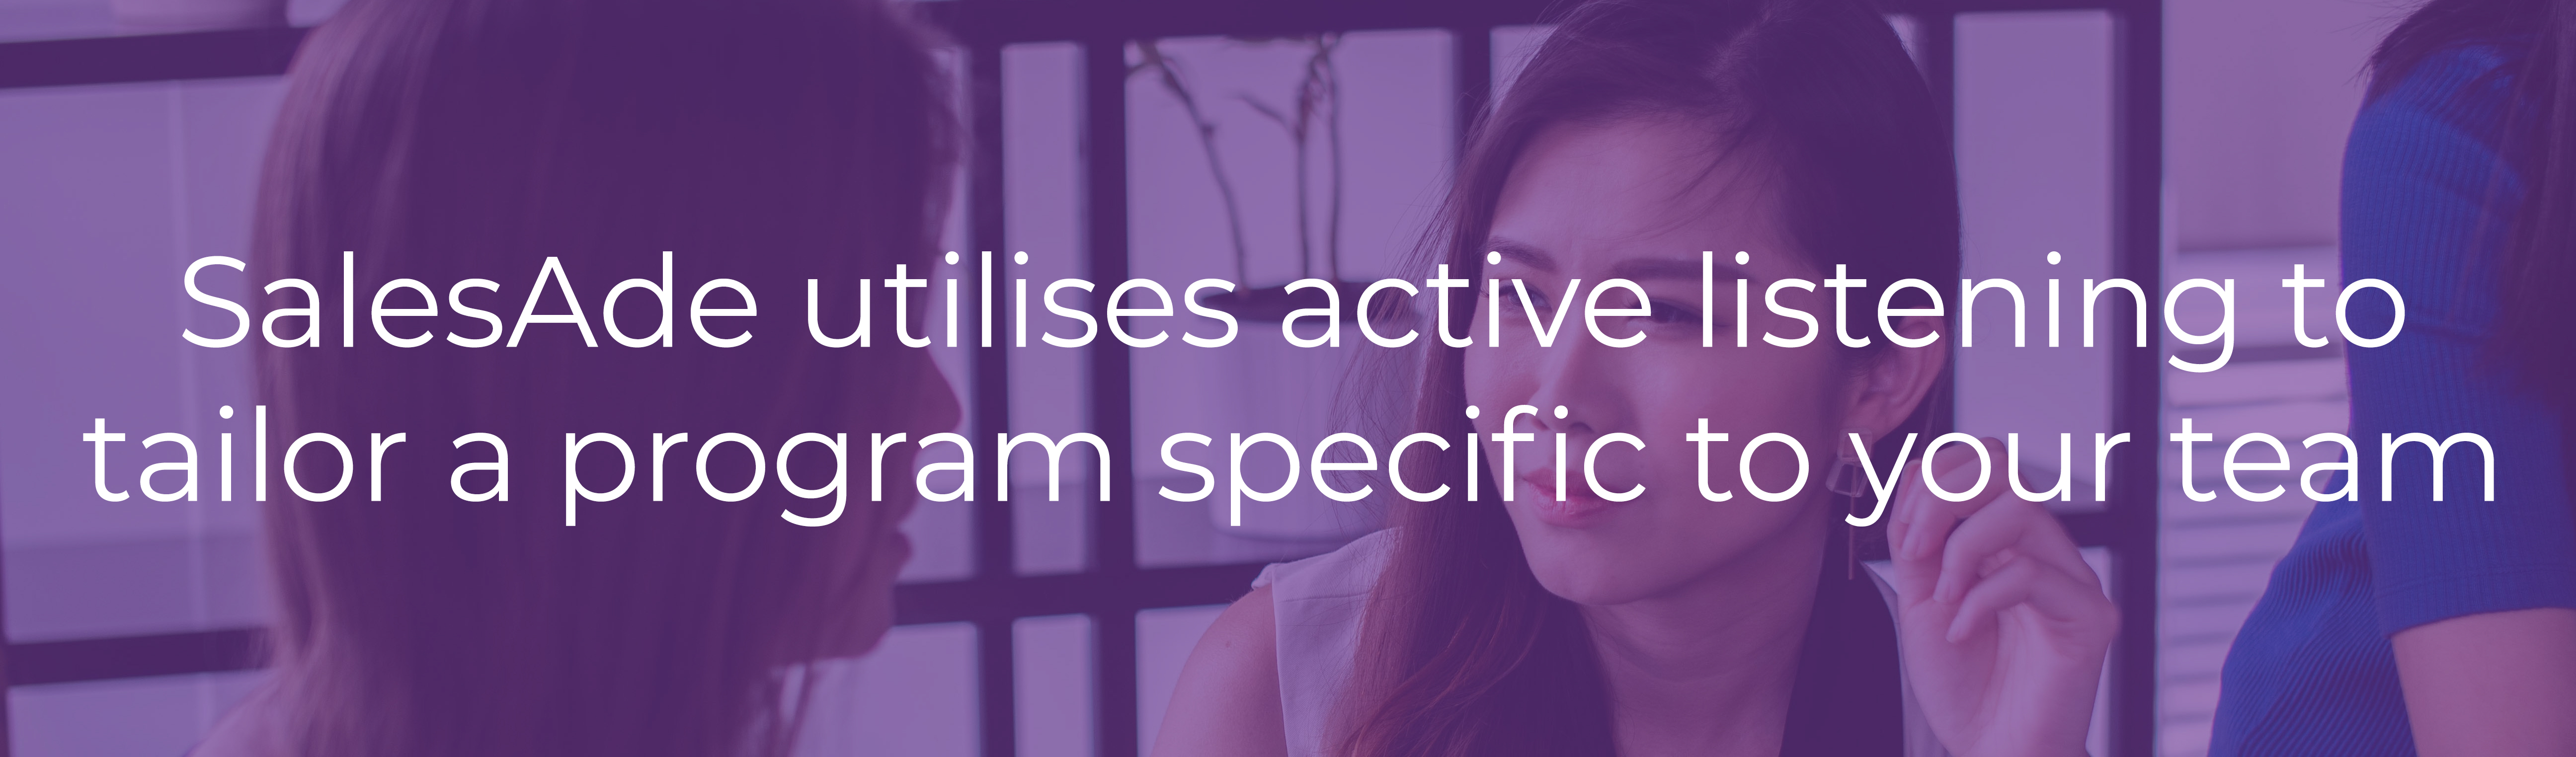 SalesAde utilises active listening to tailor a program specific to your team